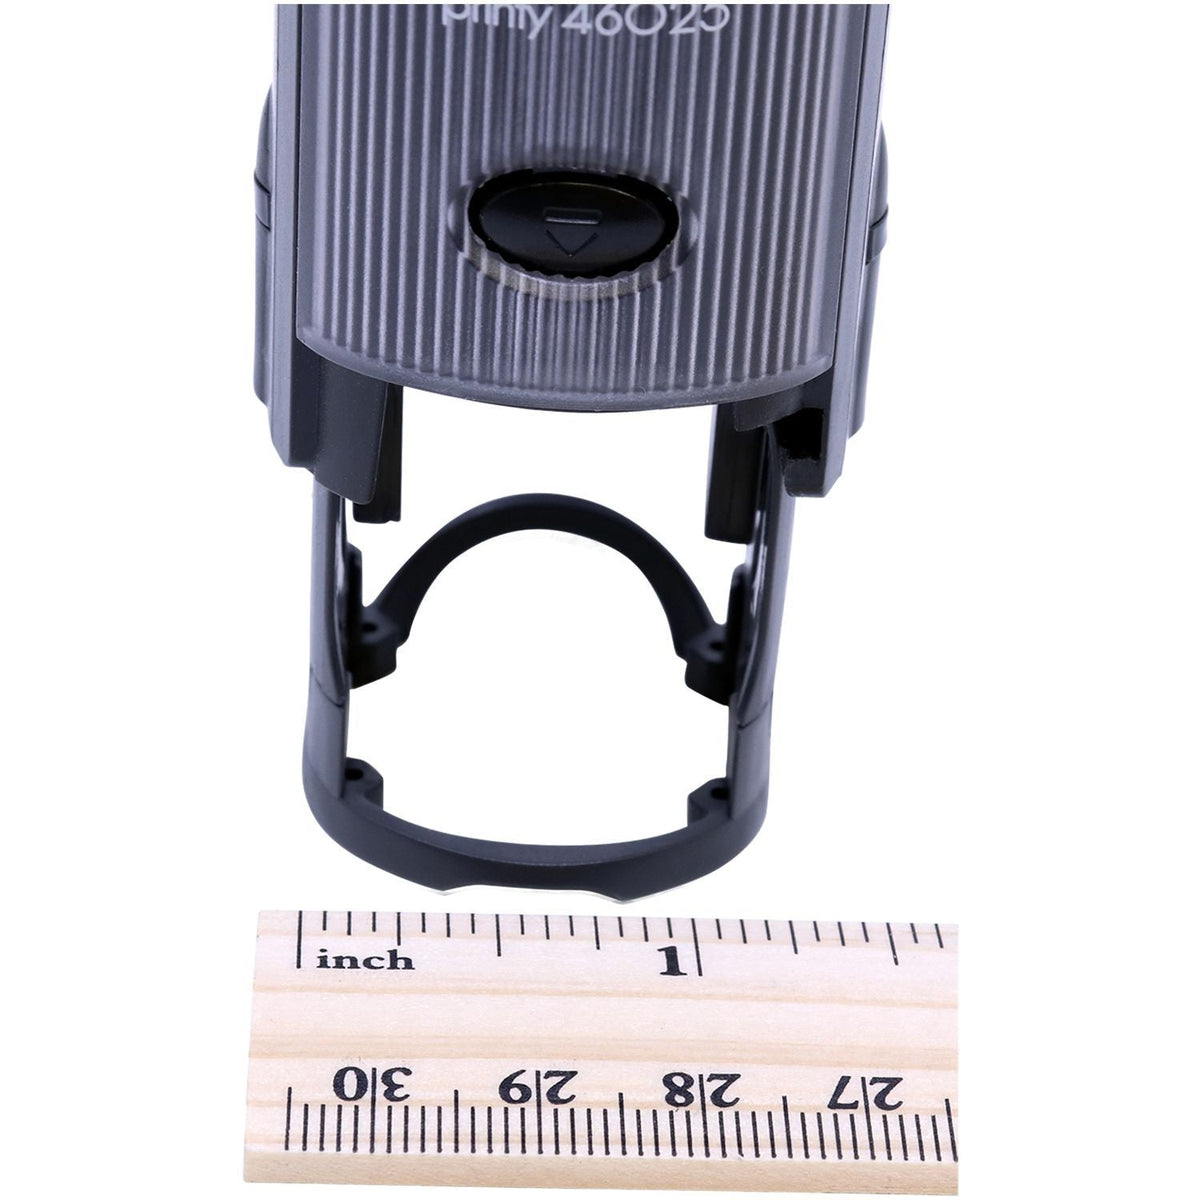 Measurment of Self-Inking Round Great Improvement Stamp with Ruler